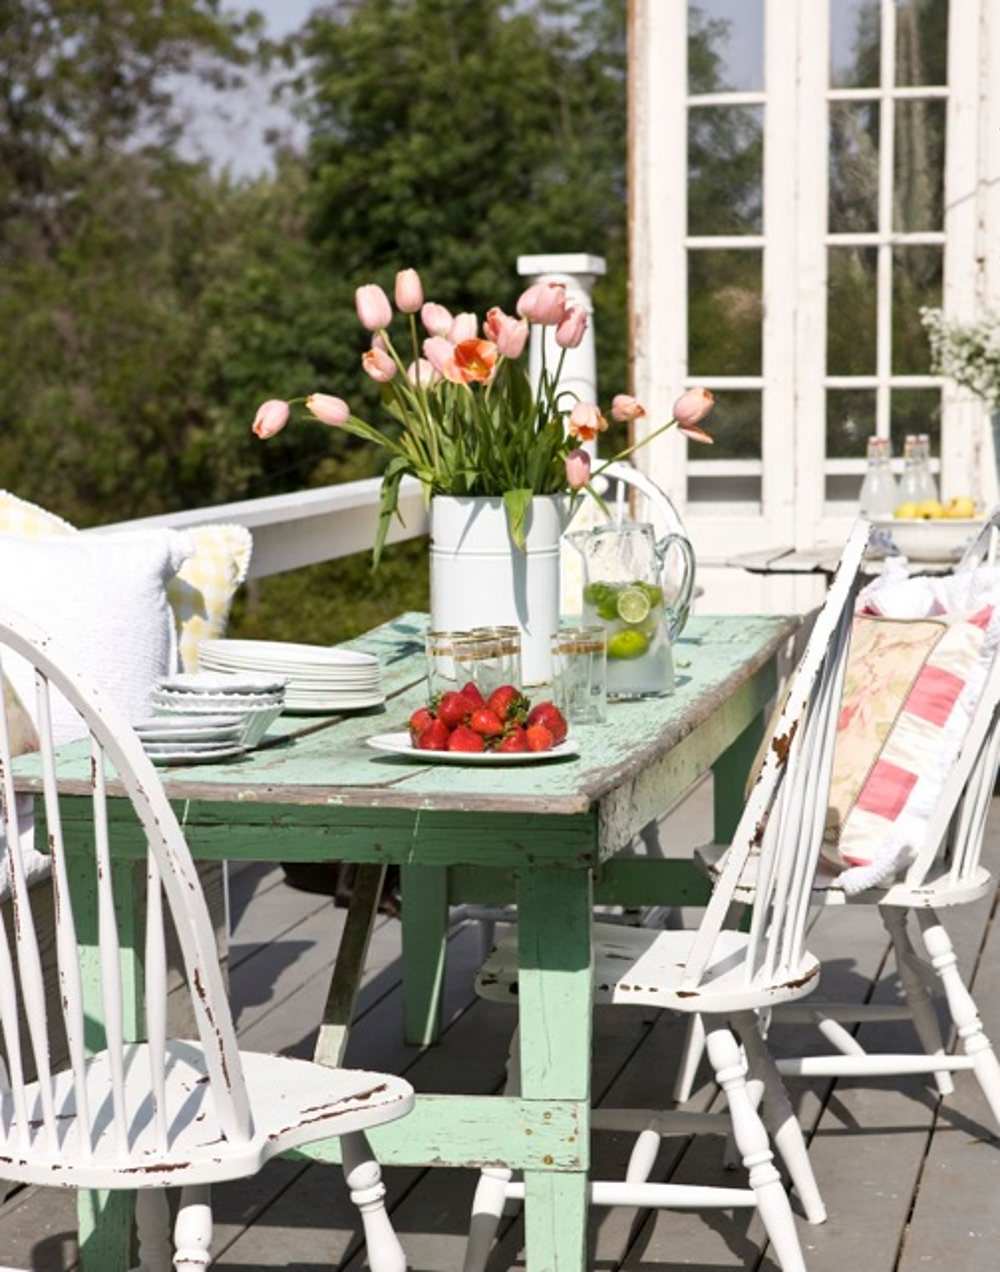 1 Rustic Charm Outdoors: Shabby Chic Patio Ideas